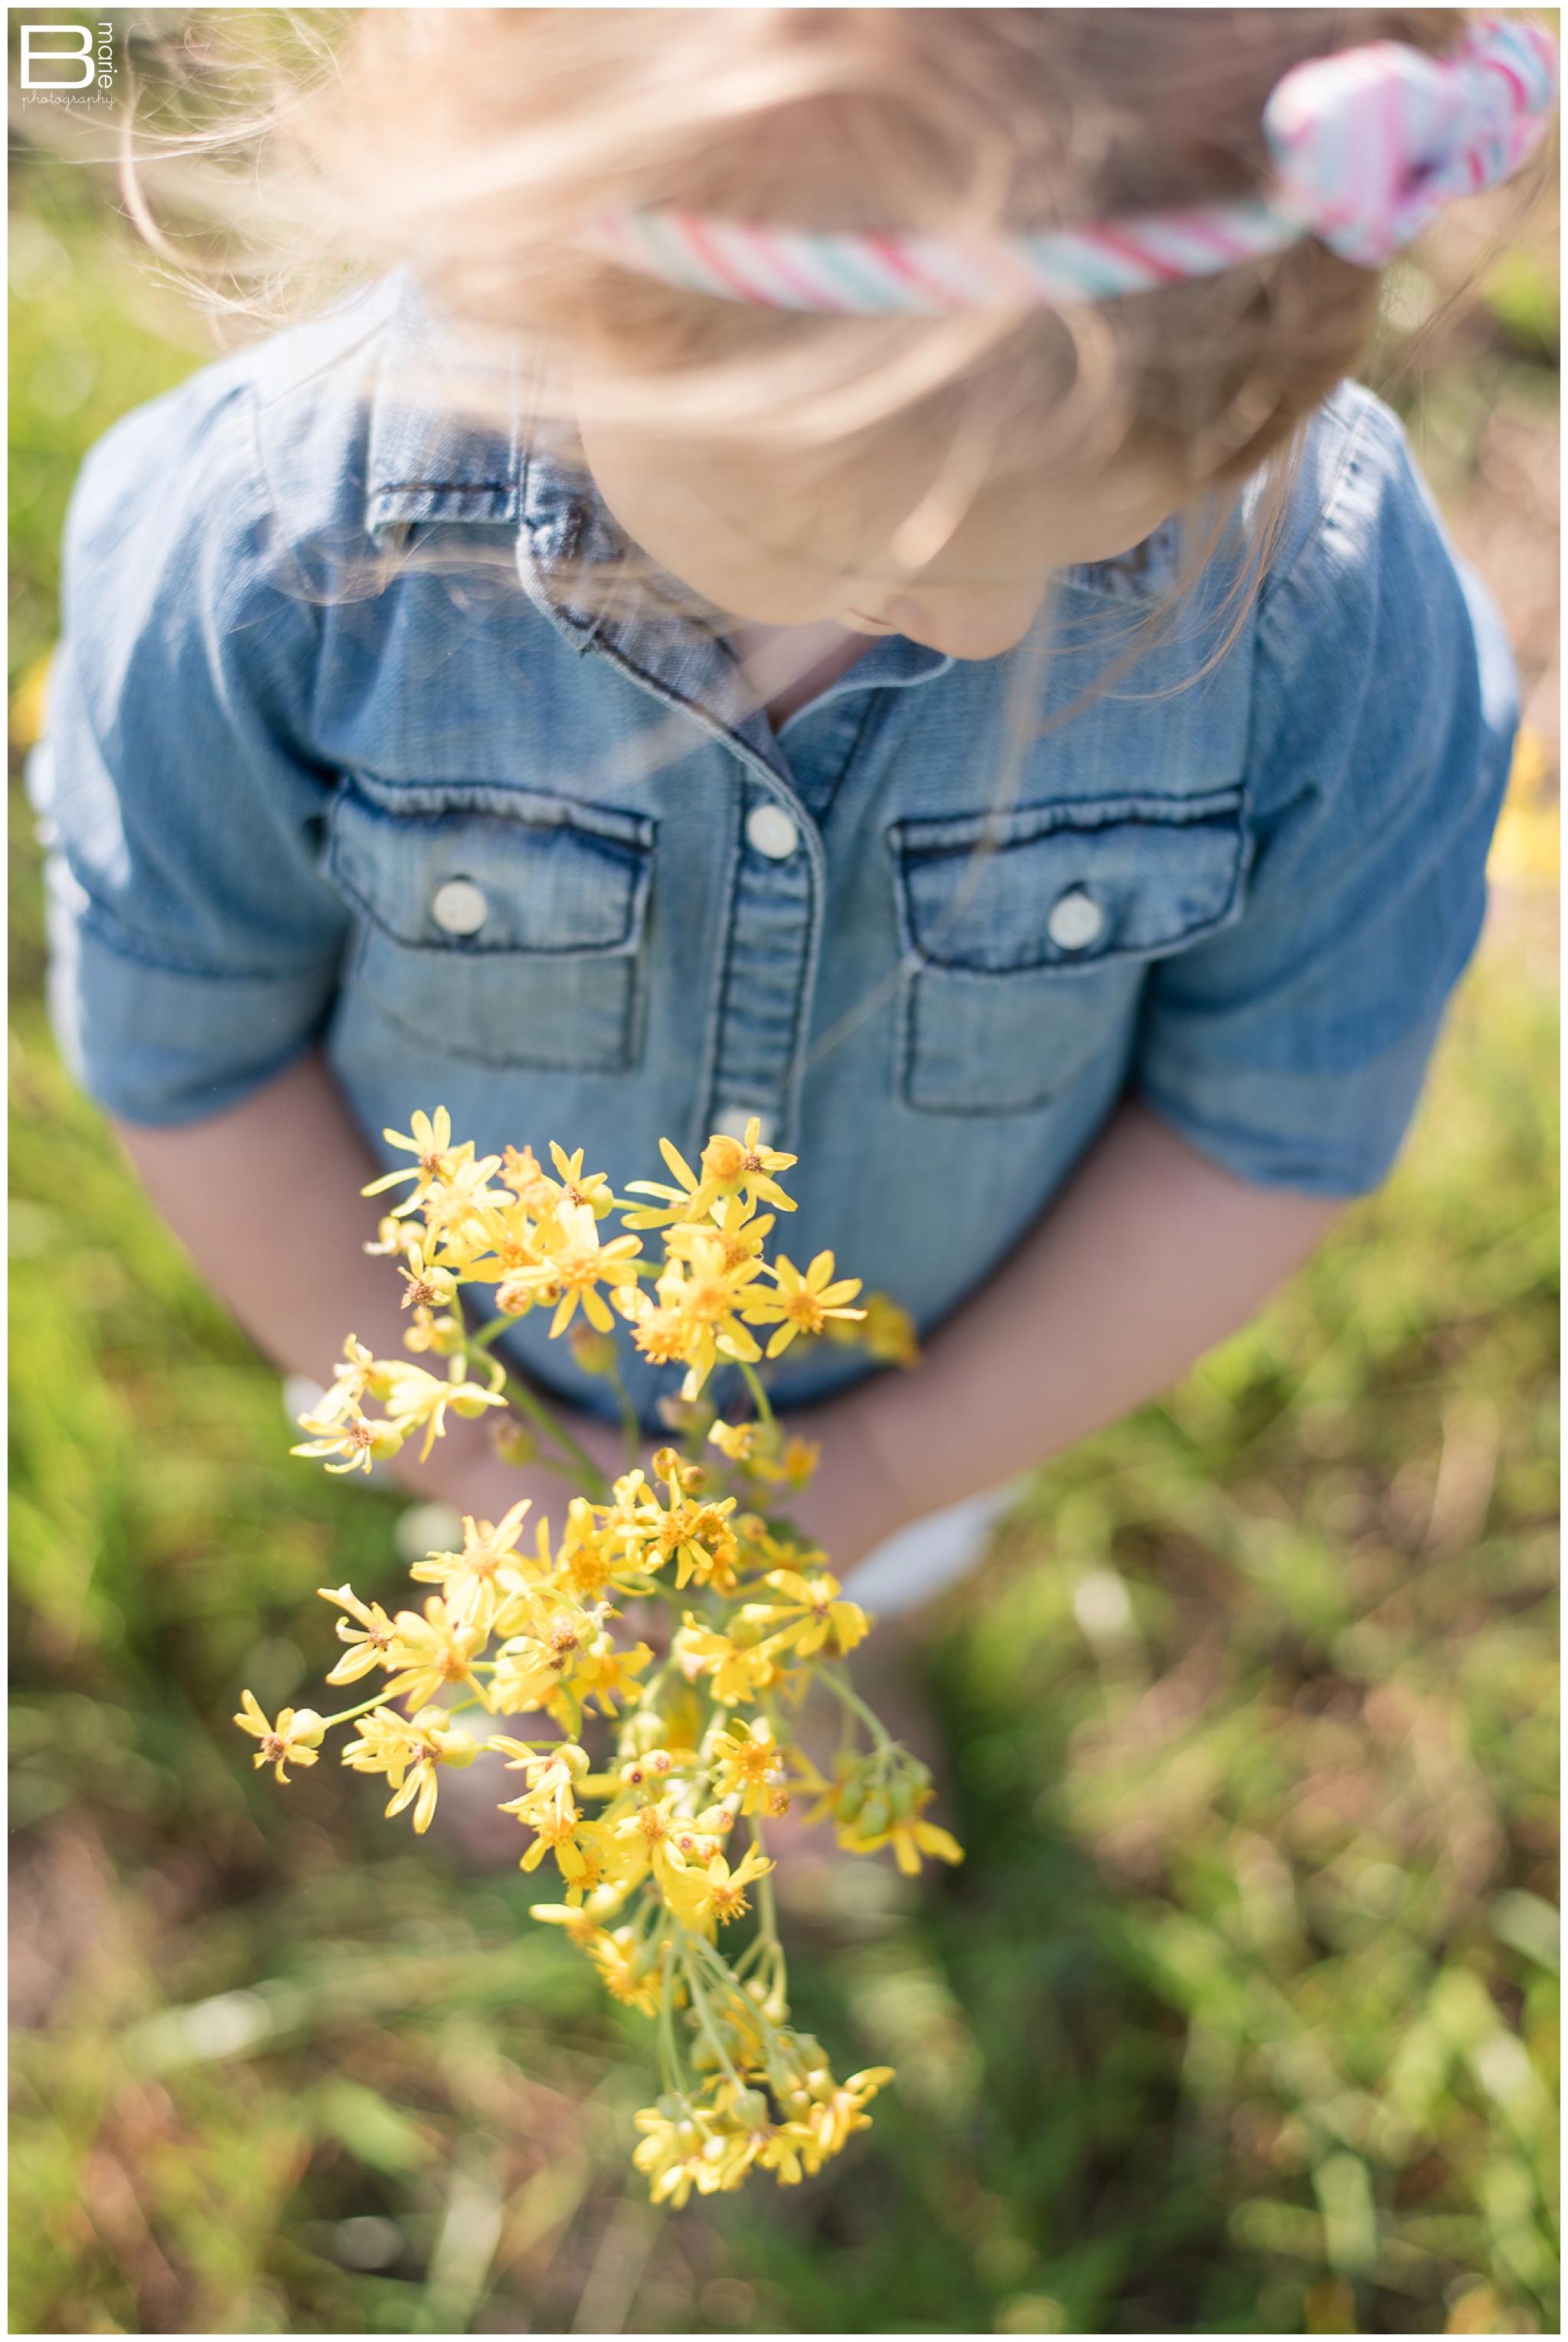 Kingwood family photographer image of toddler with picked wildflowers